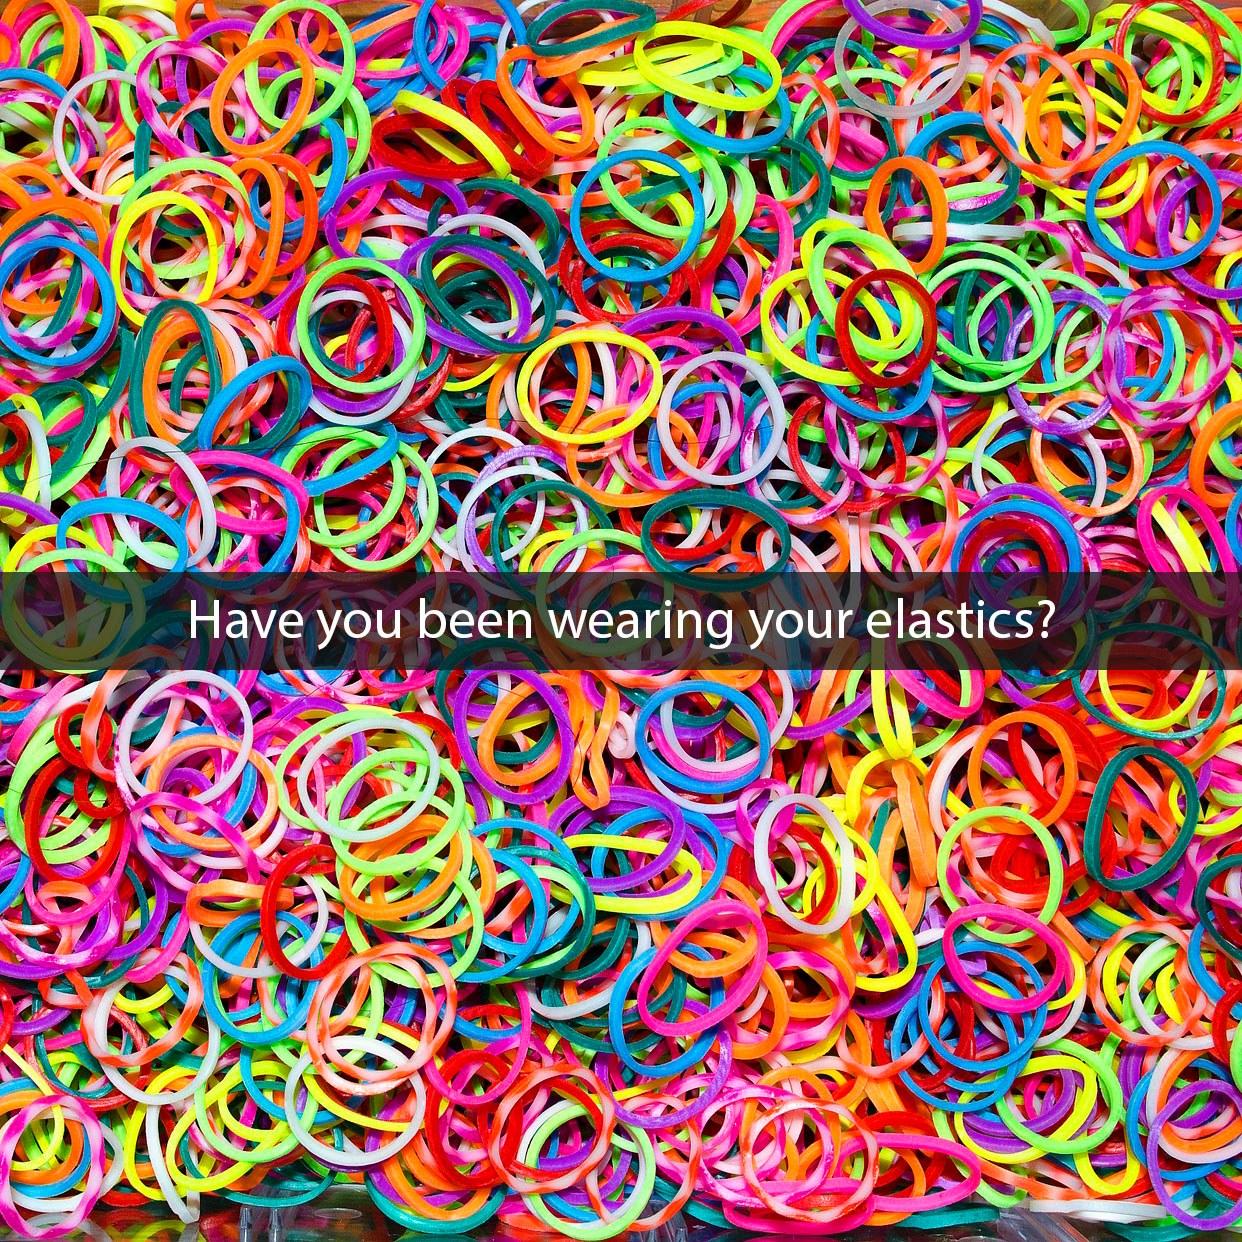 Have You Been Wearing Your Elastics?